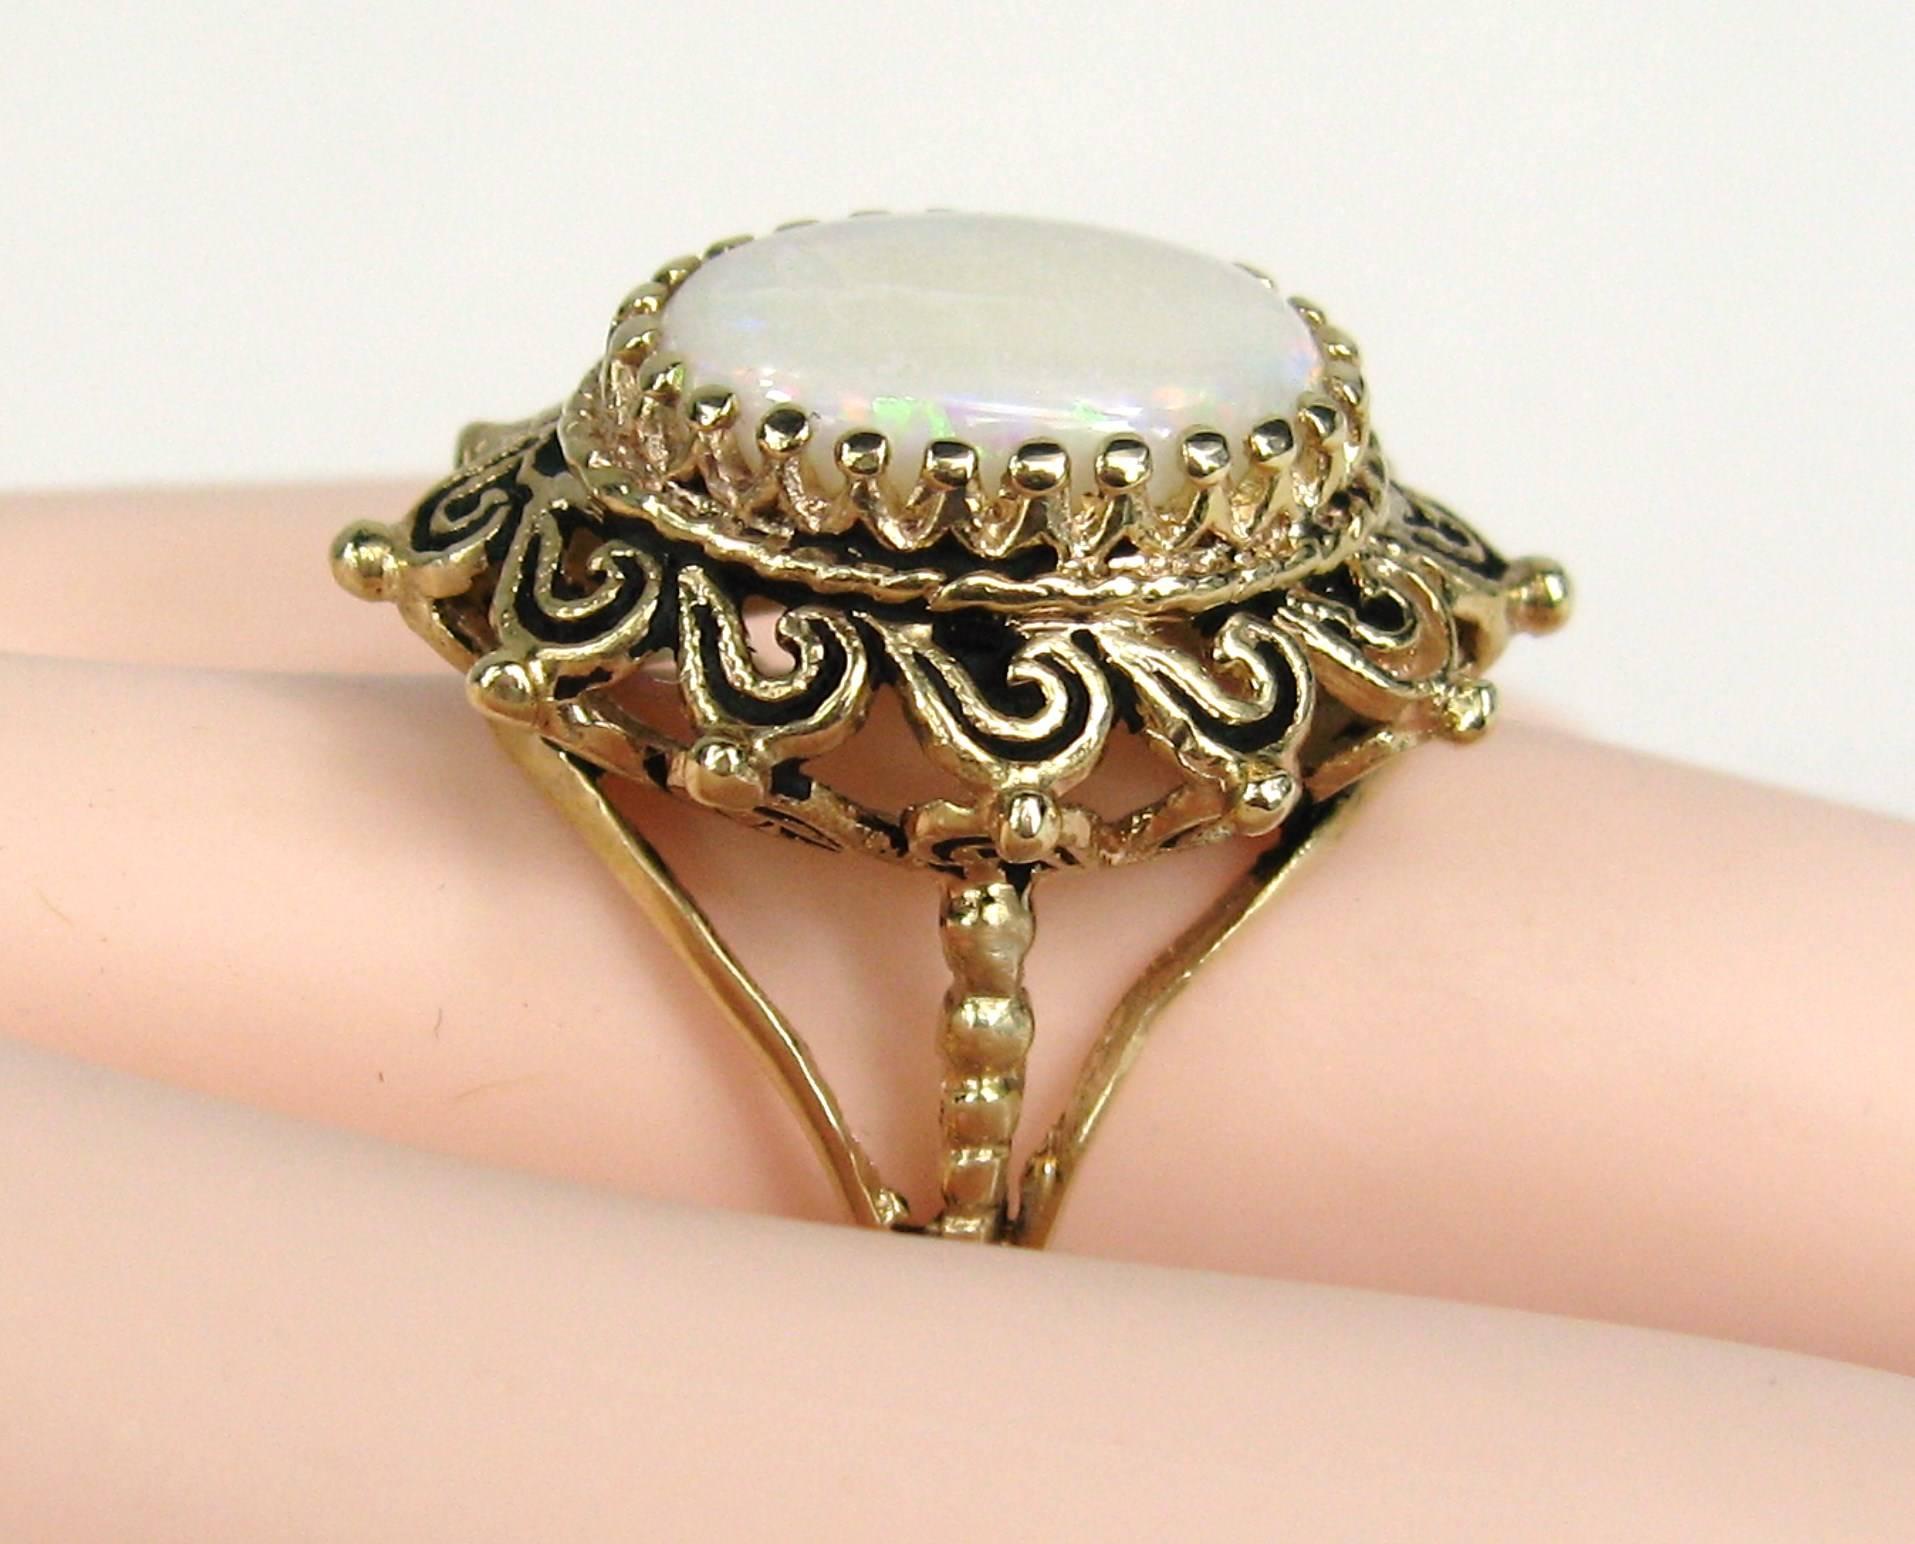 14 Karat Gold Opal Cocktail Ring In Good Condition For Sale In Wallkill, NY